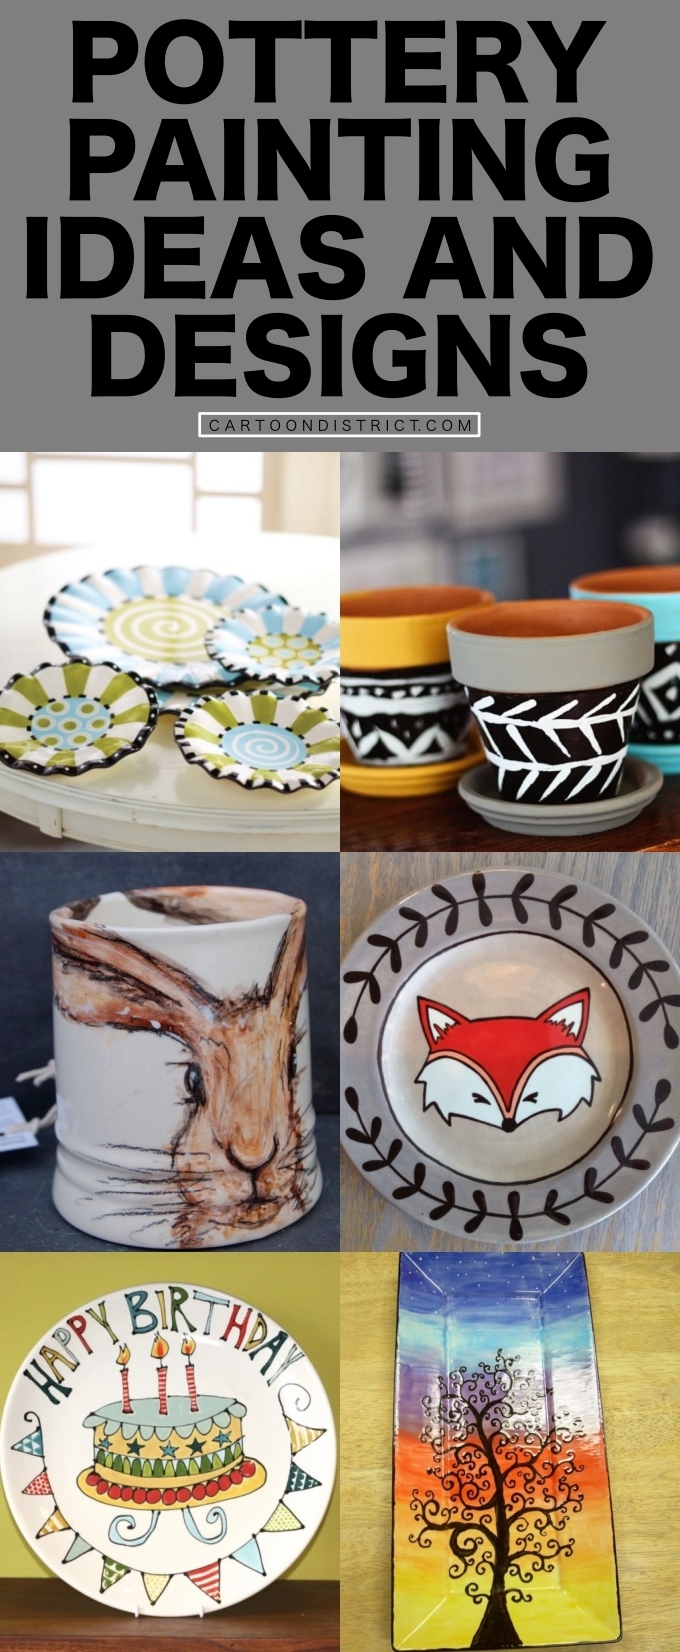 POTTERY PAINTING IDEAS AND DESIGNS